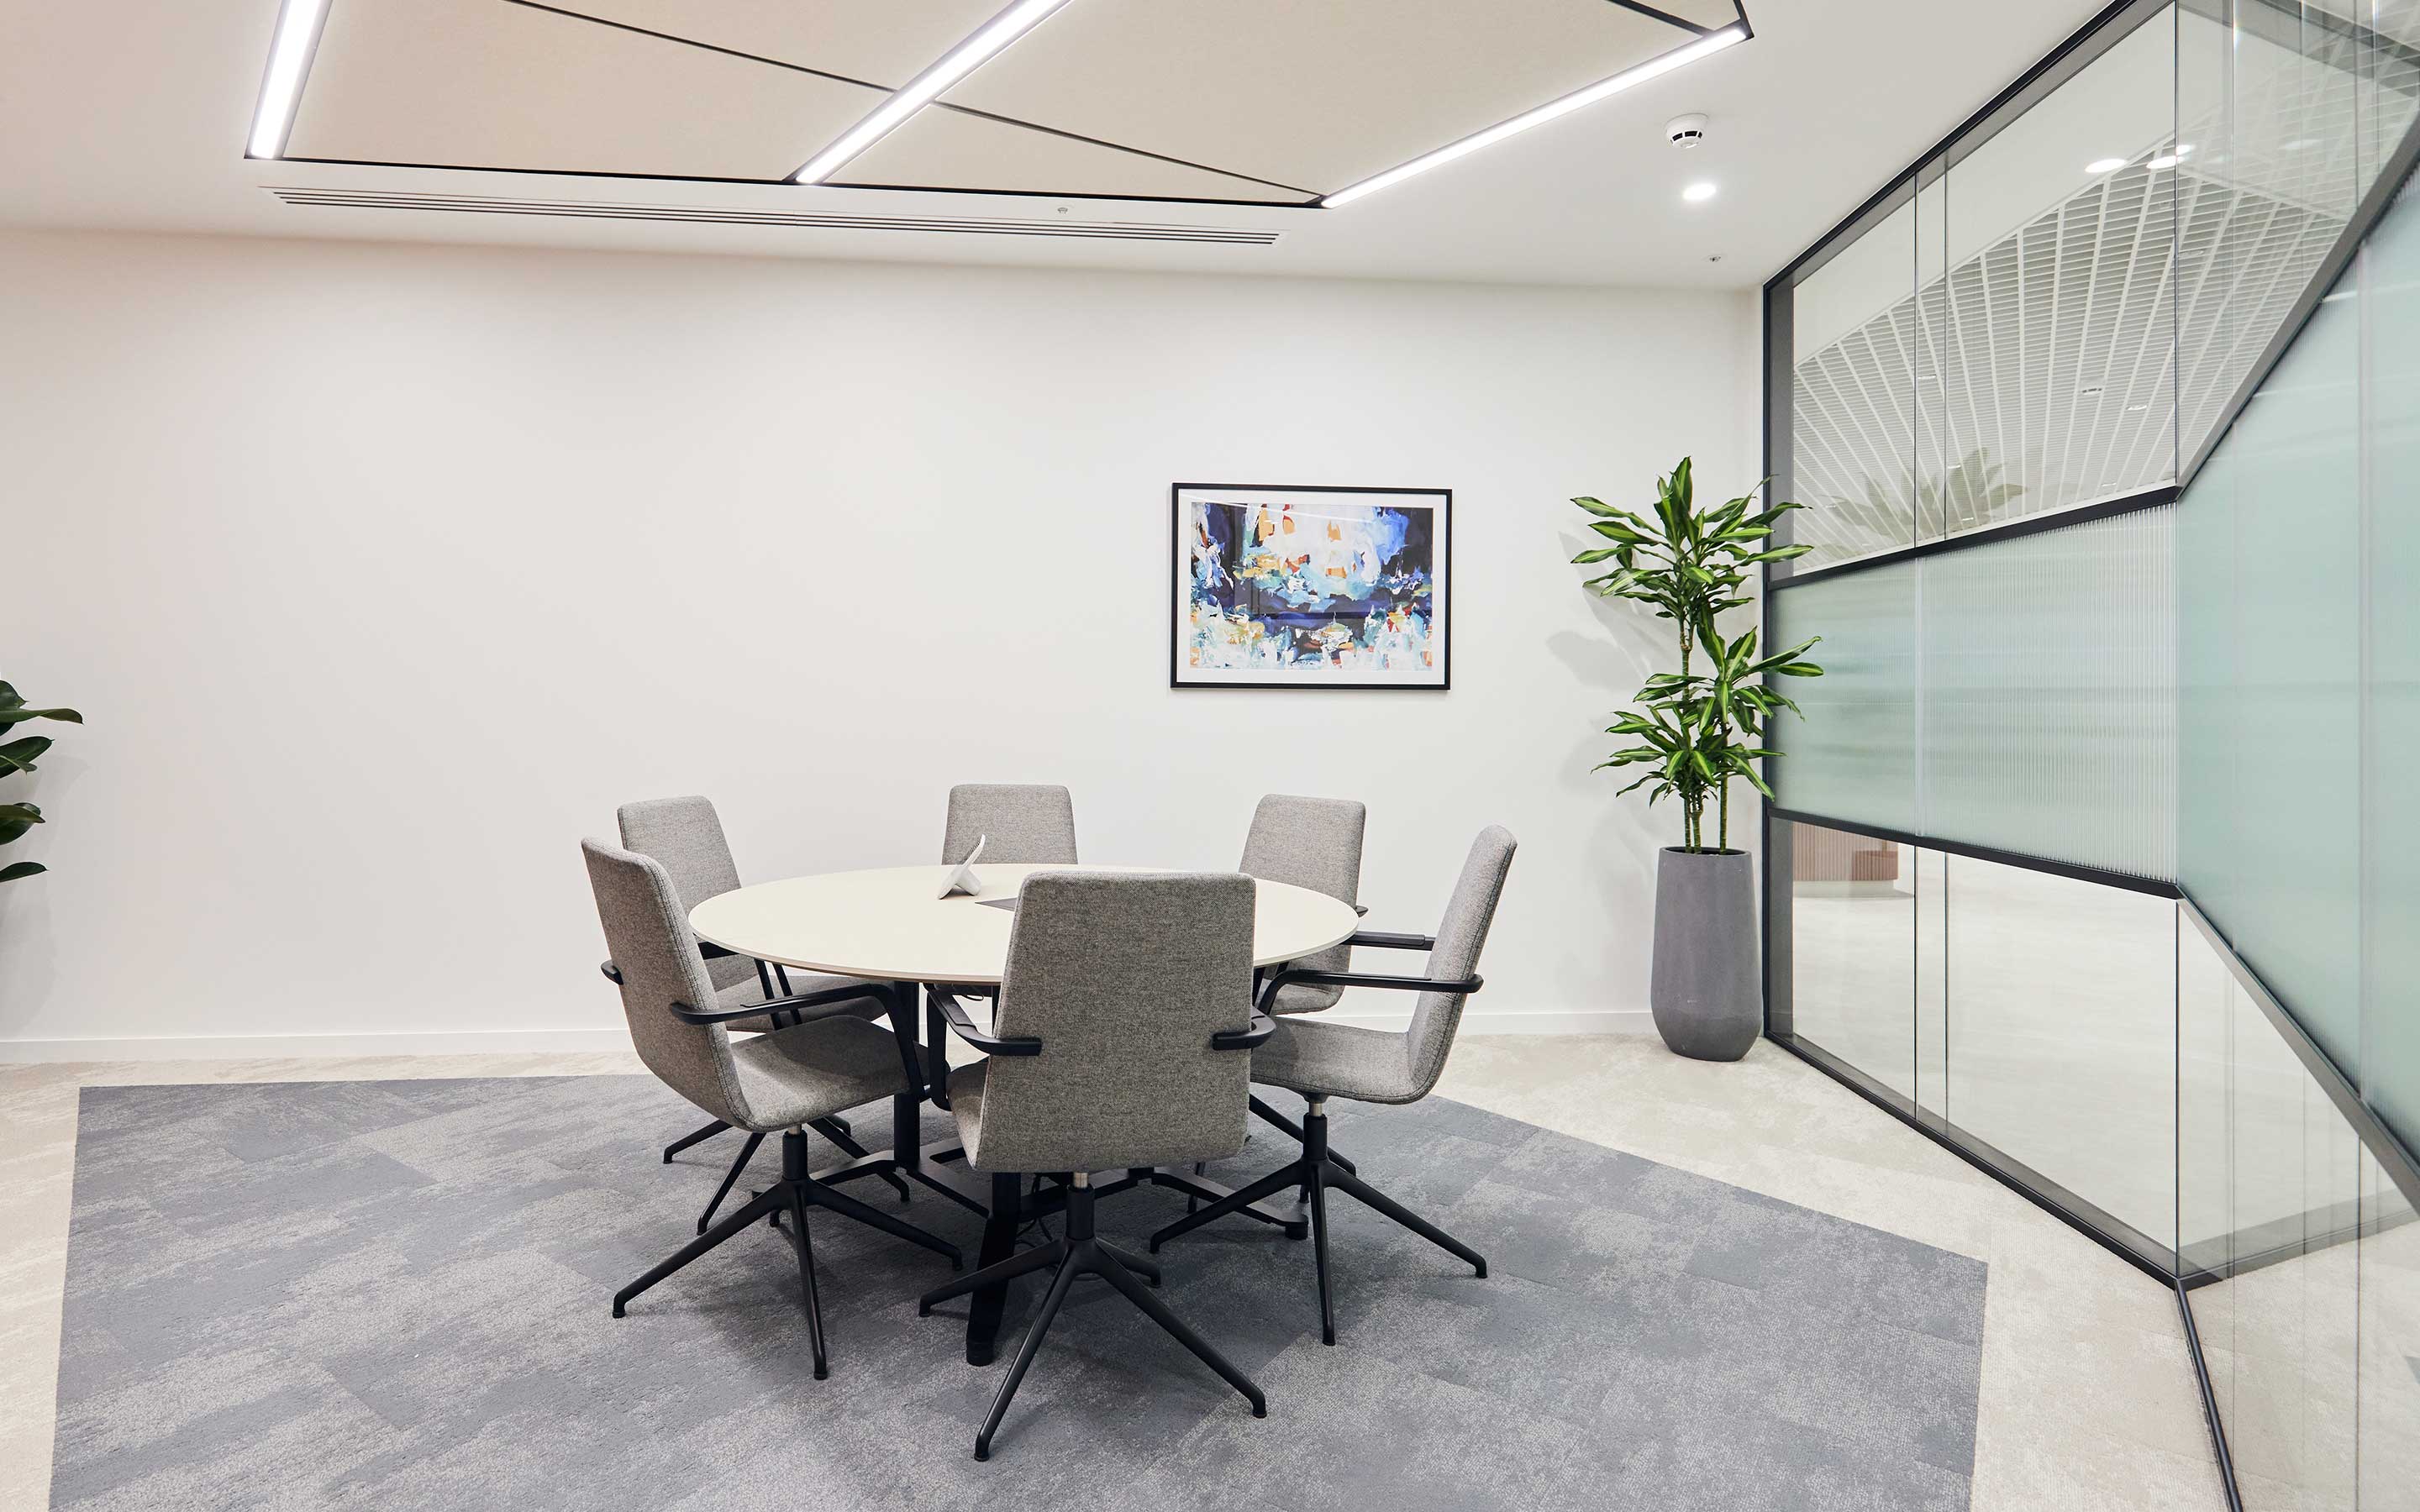 A modern office meeting room with glass walls, a round meeting table and chairs, and lovely artwork on the wall